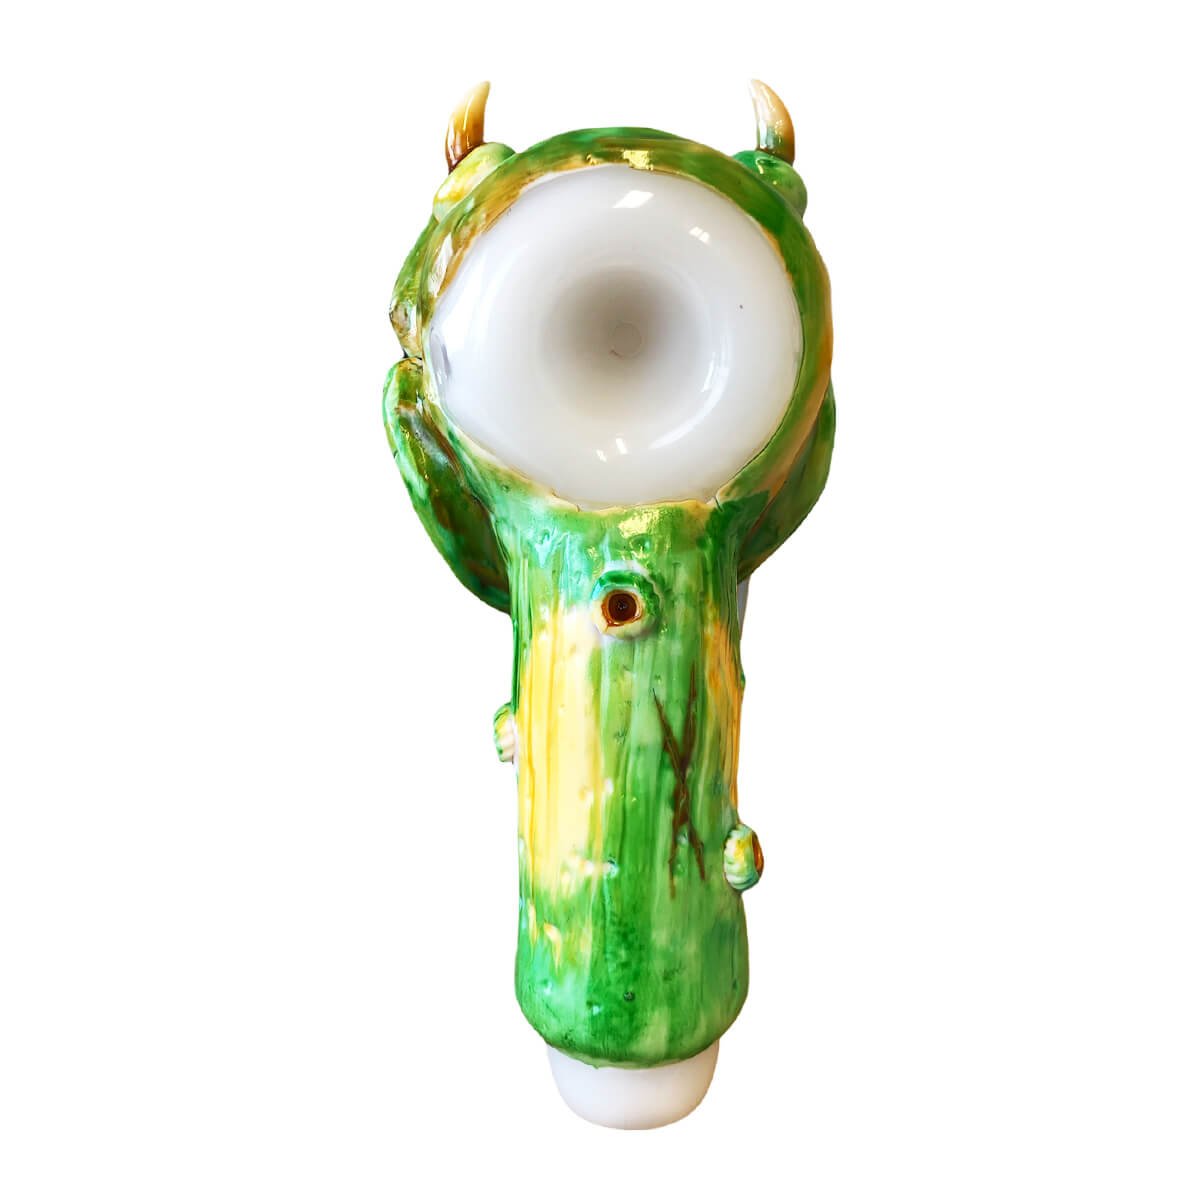 https://d30qj4y22qnbc7.cloudfront.net/wp-content/uploads/2021/10/wholesale-glass-pipe-green-stoned-thing-3.jpg